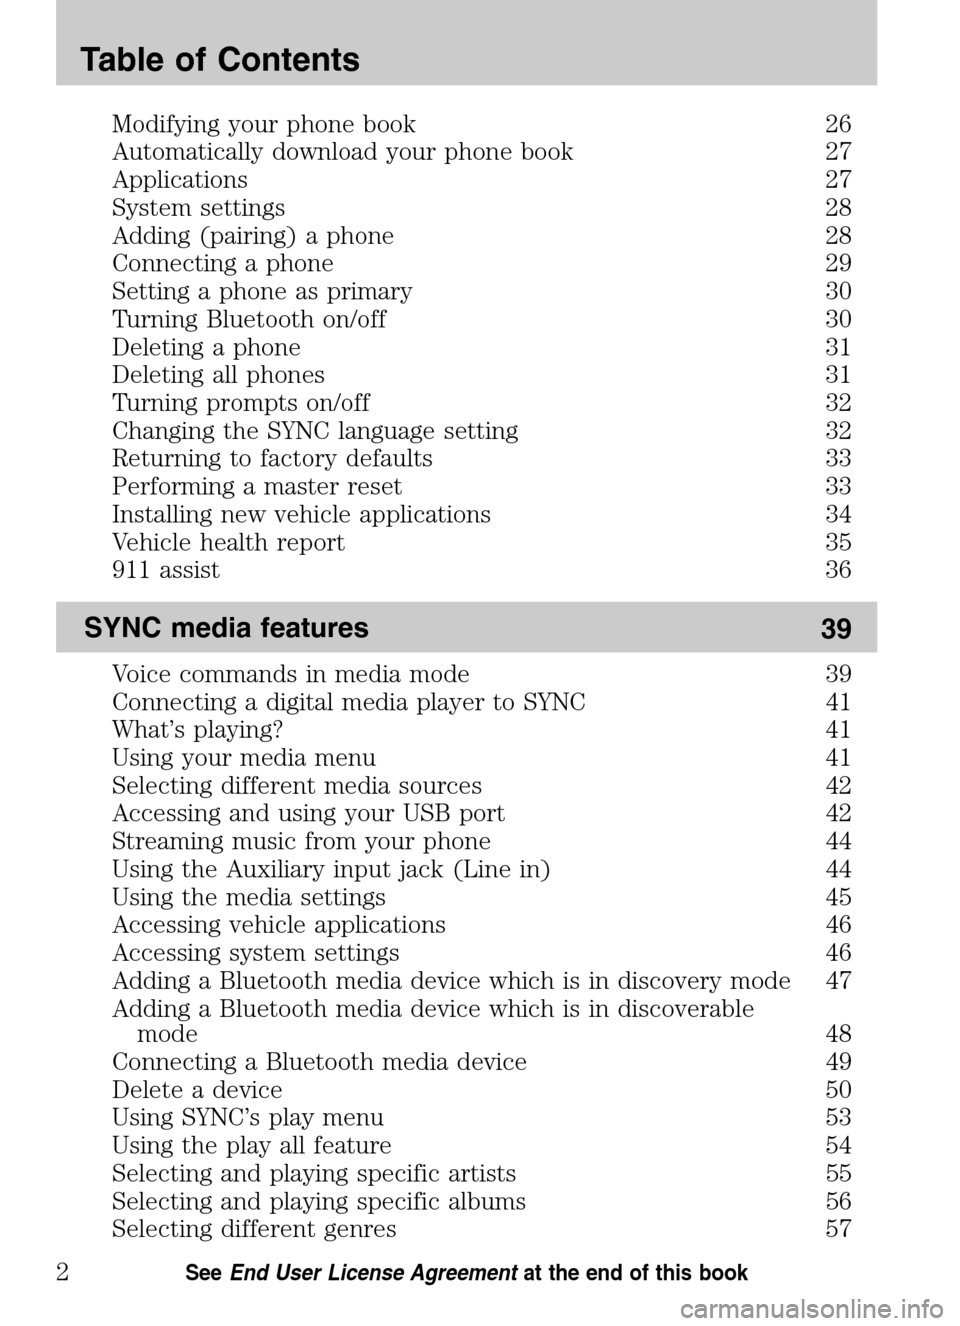 Mercury Sable 2009  SYNC Supplement  Modifying your phone book 26 
Automatically download your phone book 27
Applications 27
System settings 28
Adding (pairing) a phone 28
Connecting a phone 29
Setting a phone as primary 30
Turning Bluet